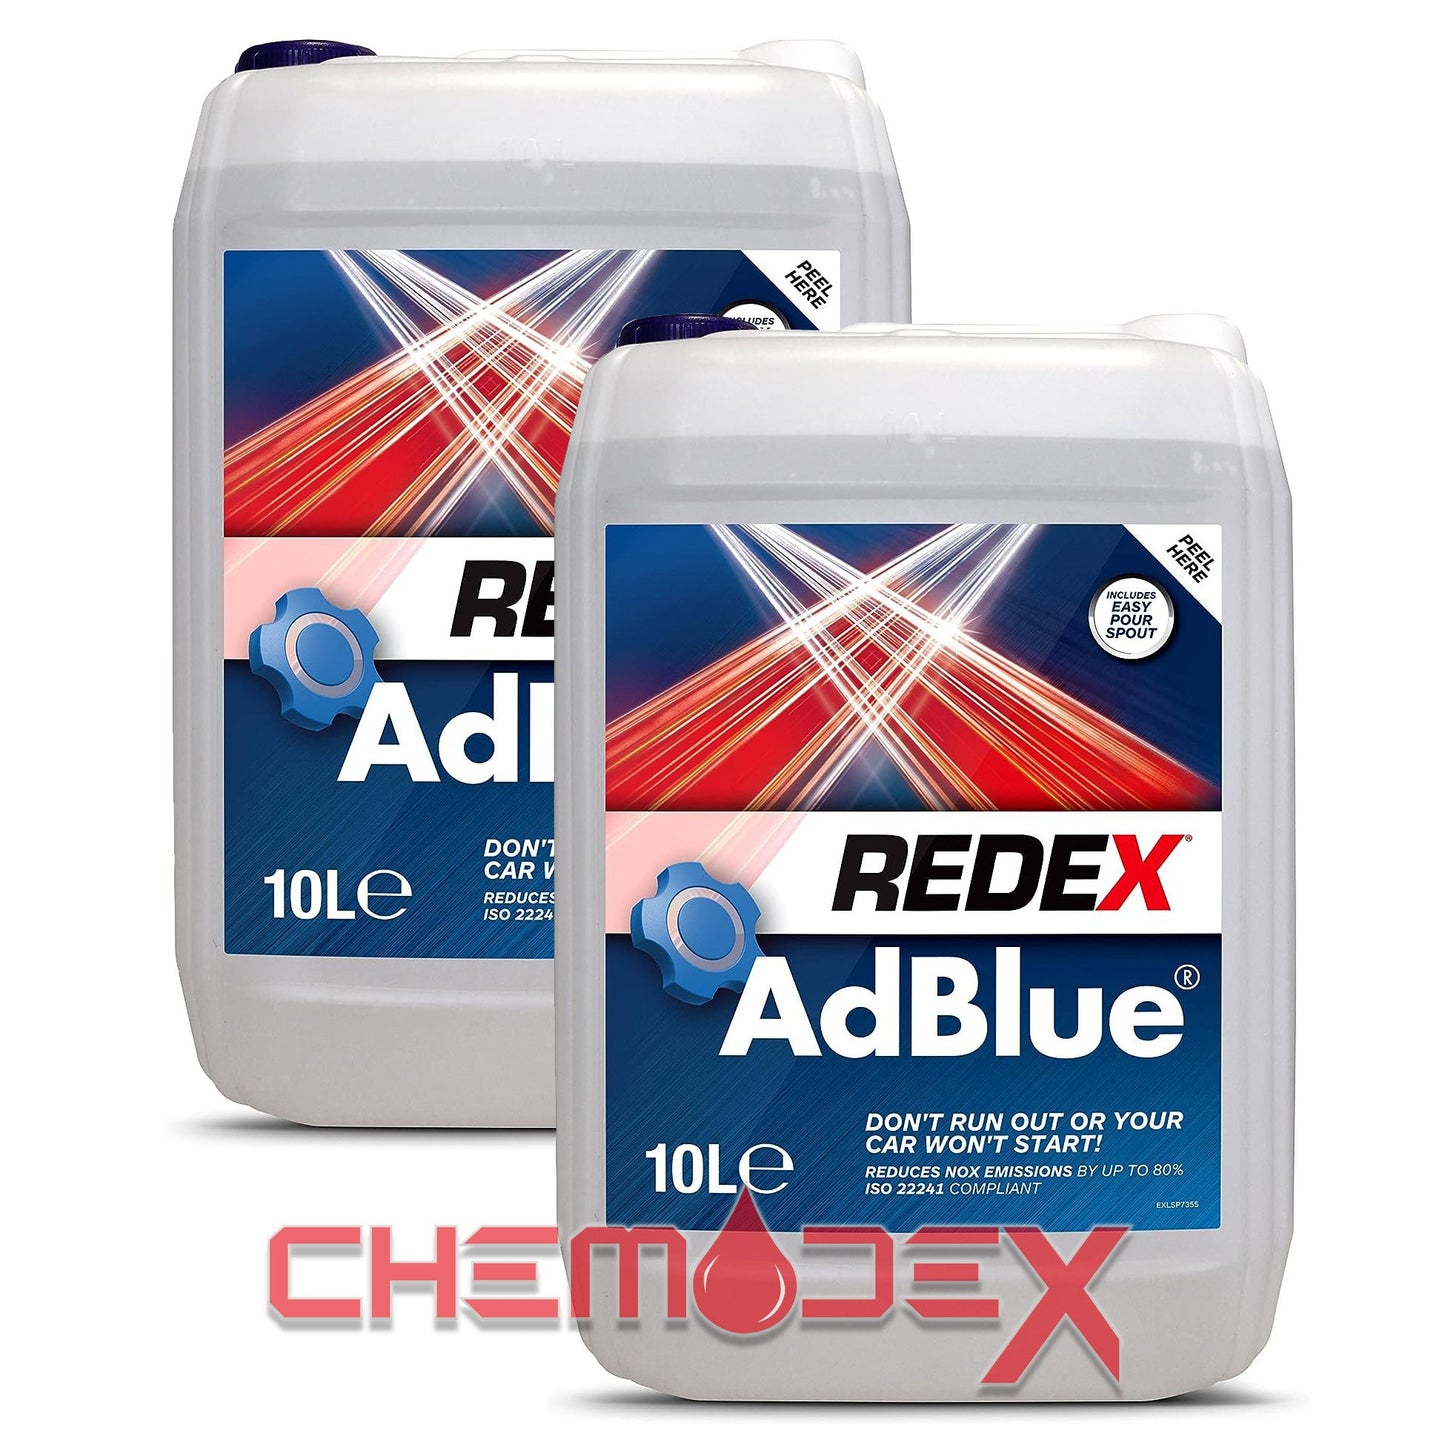 2 x 10L Redex Adblue with Easy Pour Spout, Suitable for All Makes and Models, ISO22241 Compliant, 20 Litre